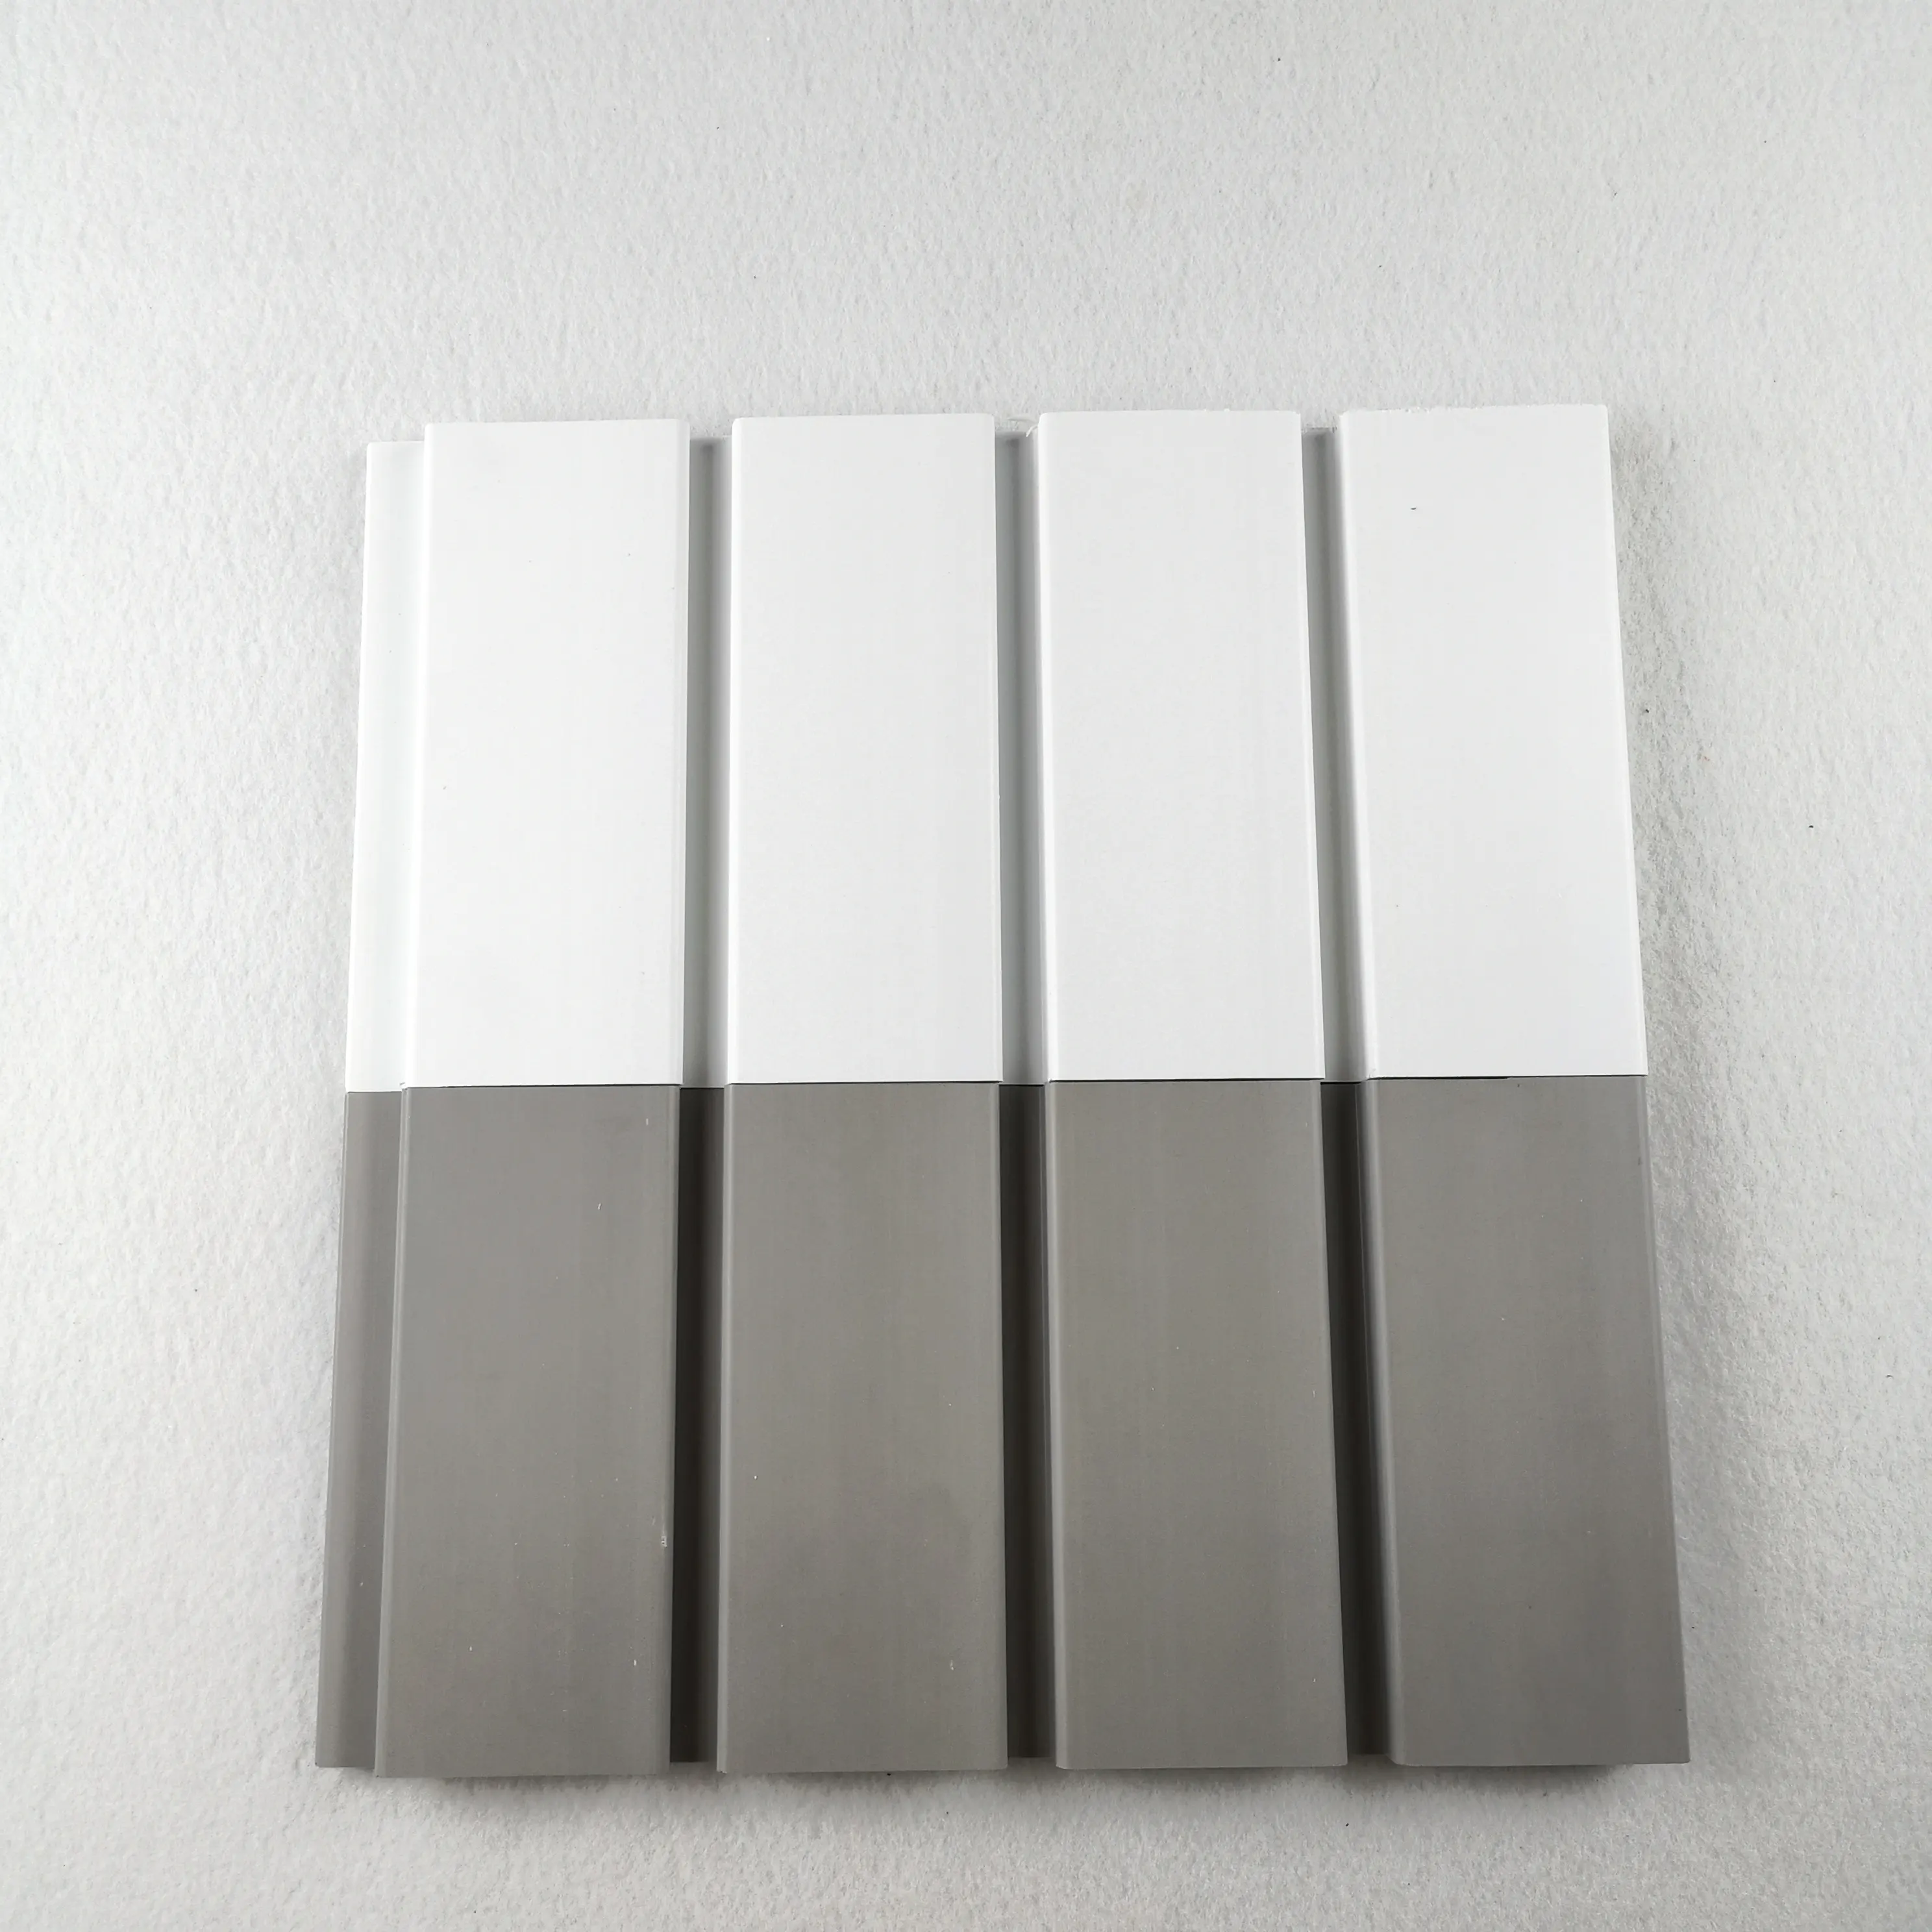 Panel Pvc Slatwall Slat Wall Garage PVC Ceilings Yellow, White and Wooden Decoration Square 300mm*17mm 03